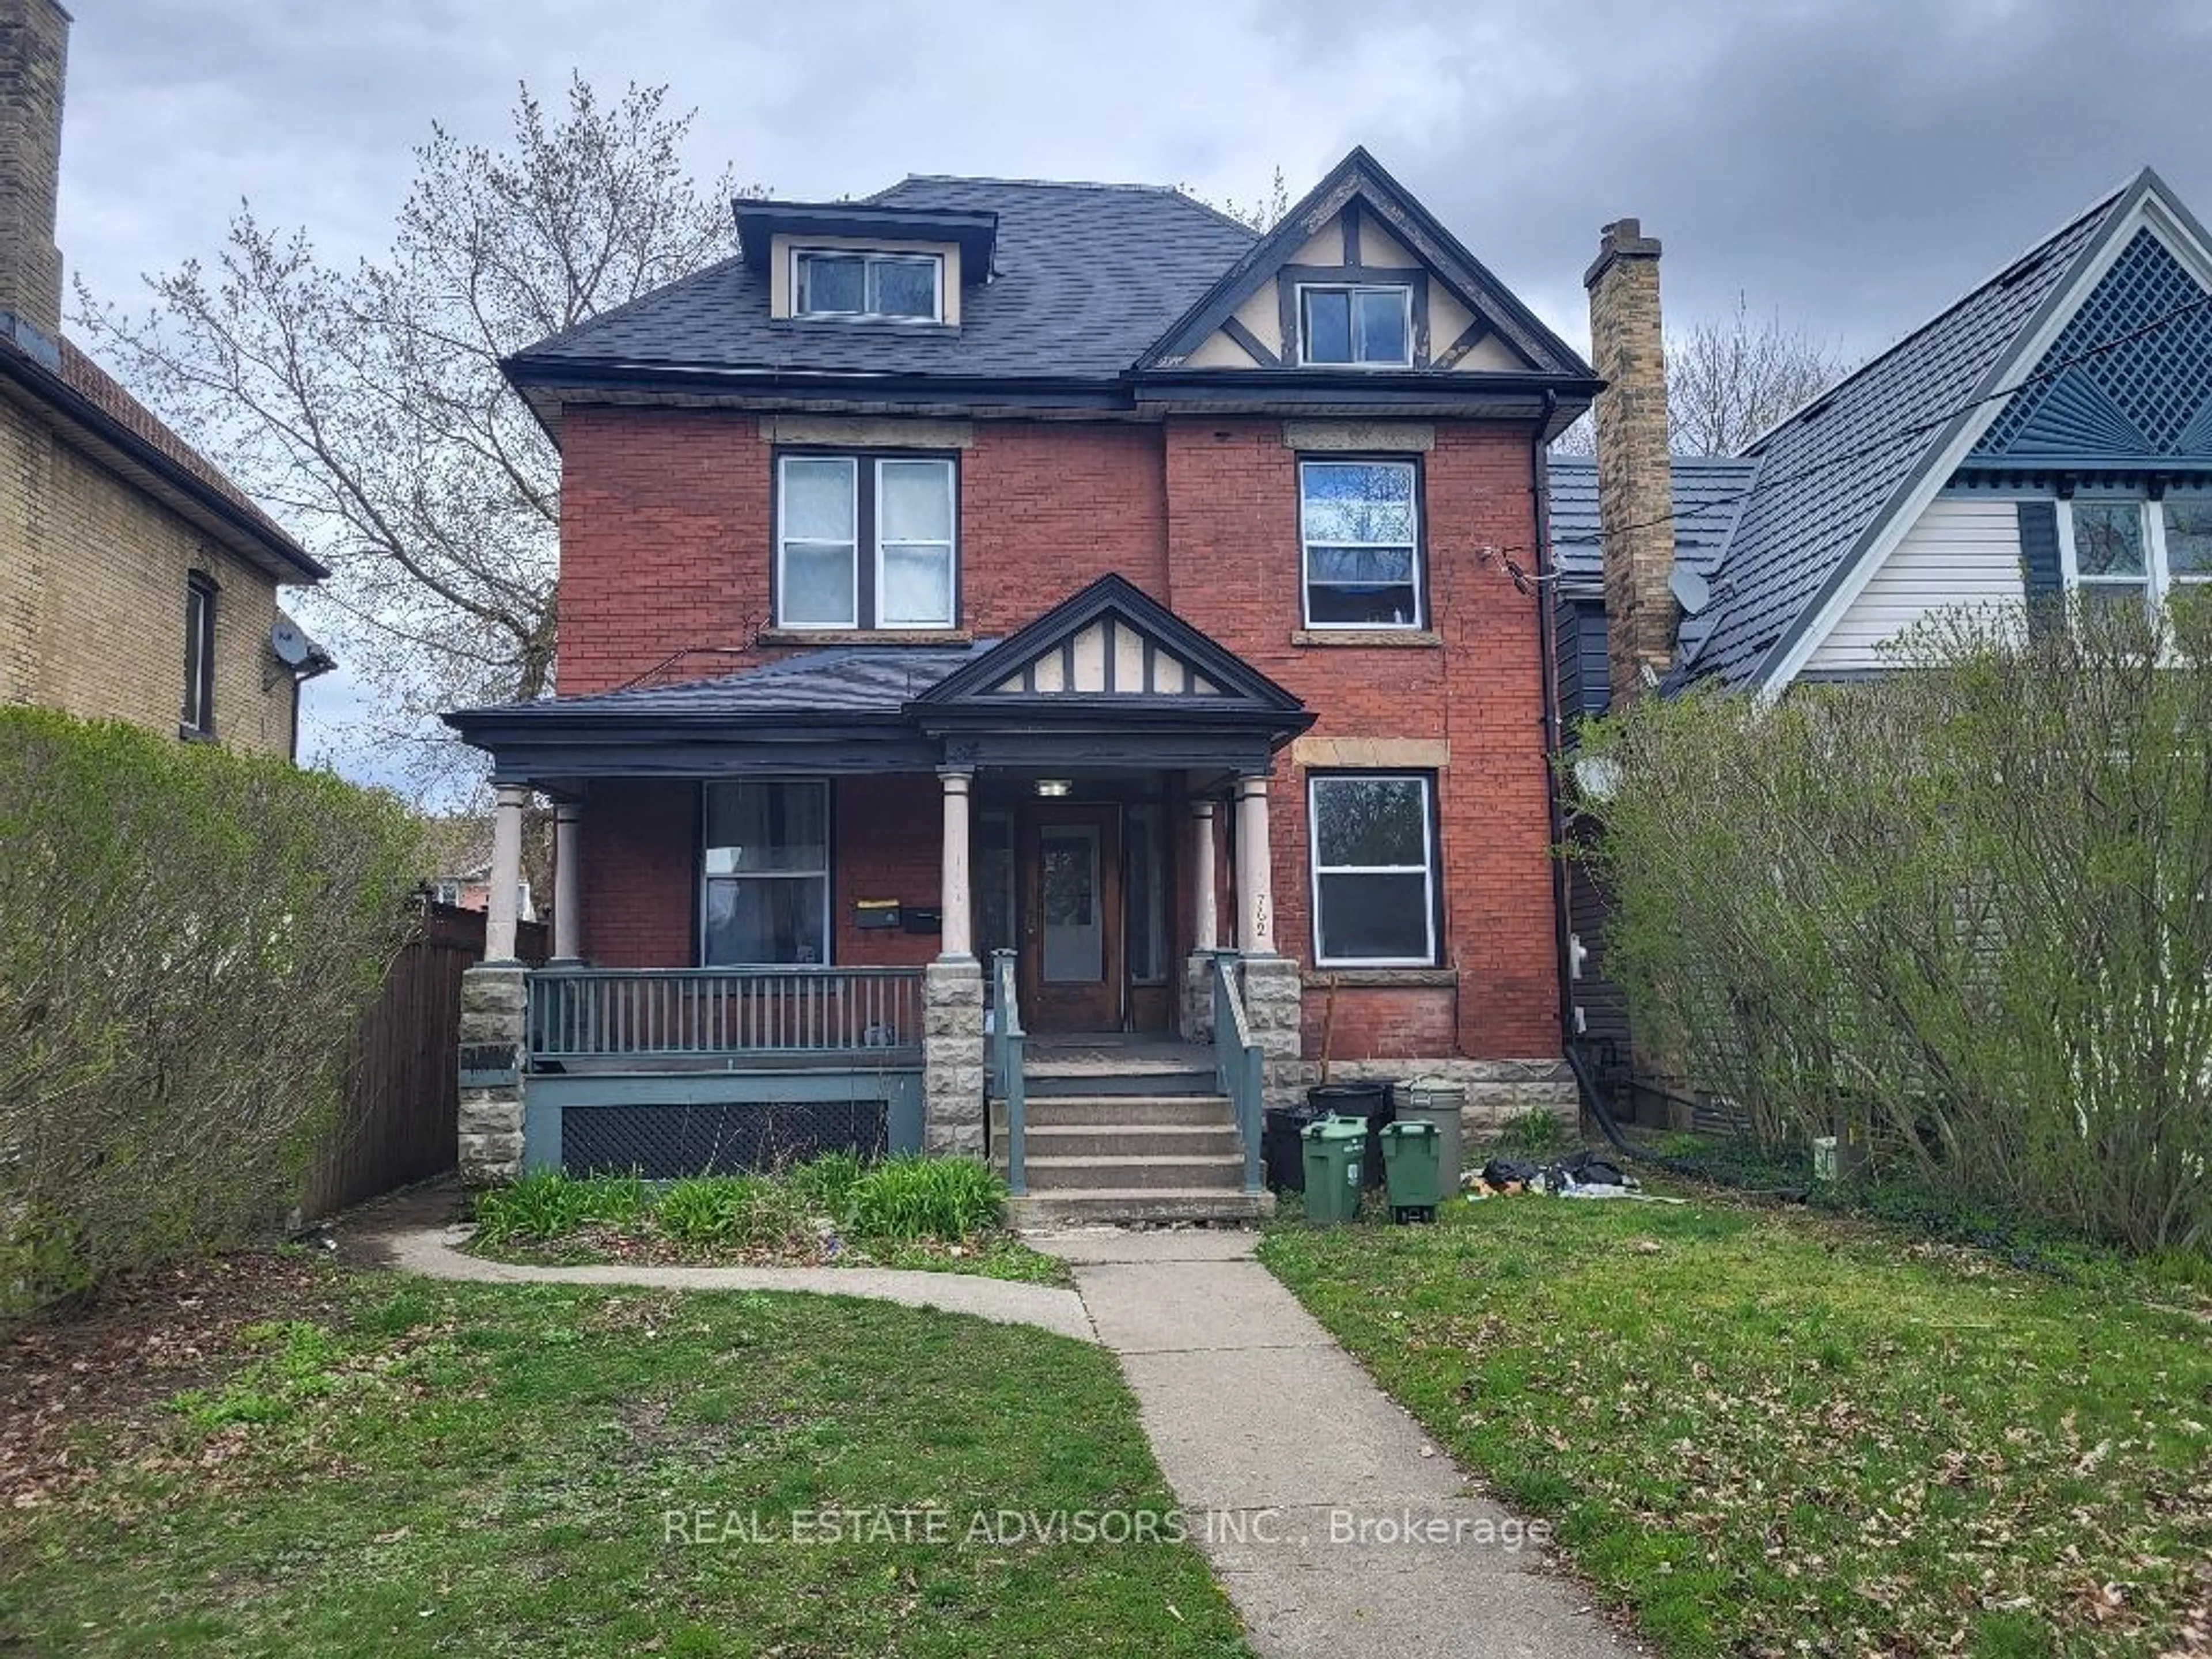 Home with brick exterior material for 762 Maitland St, London Ontario N5Y 2W3